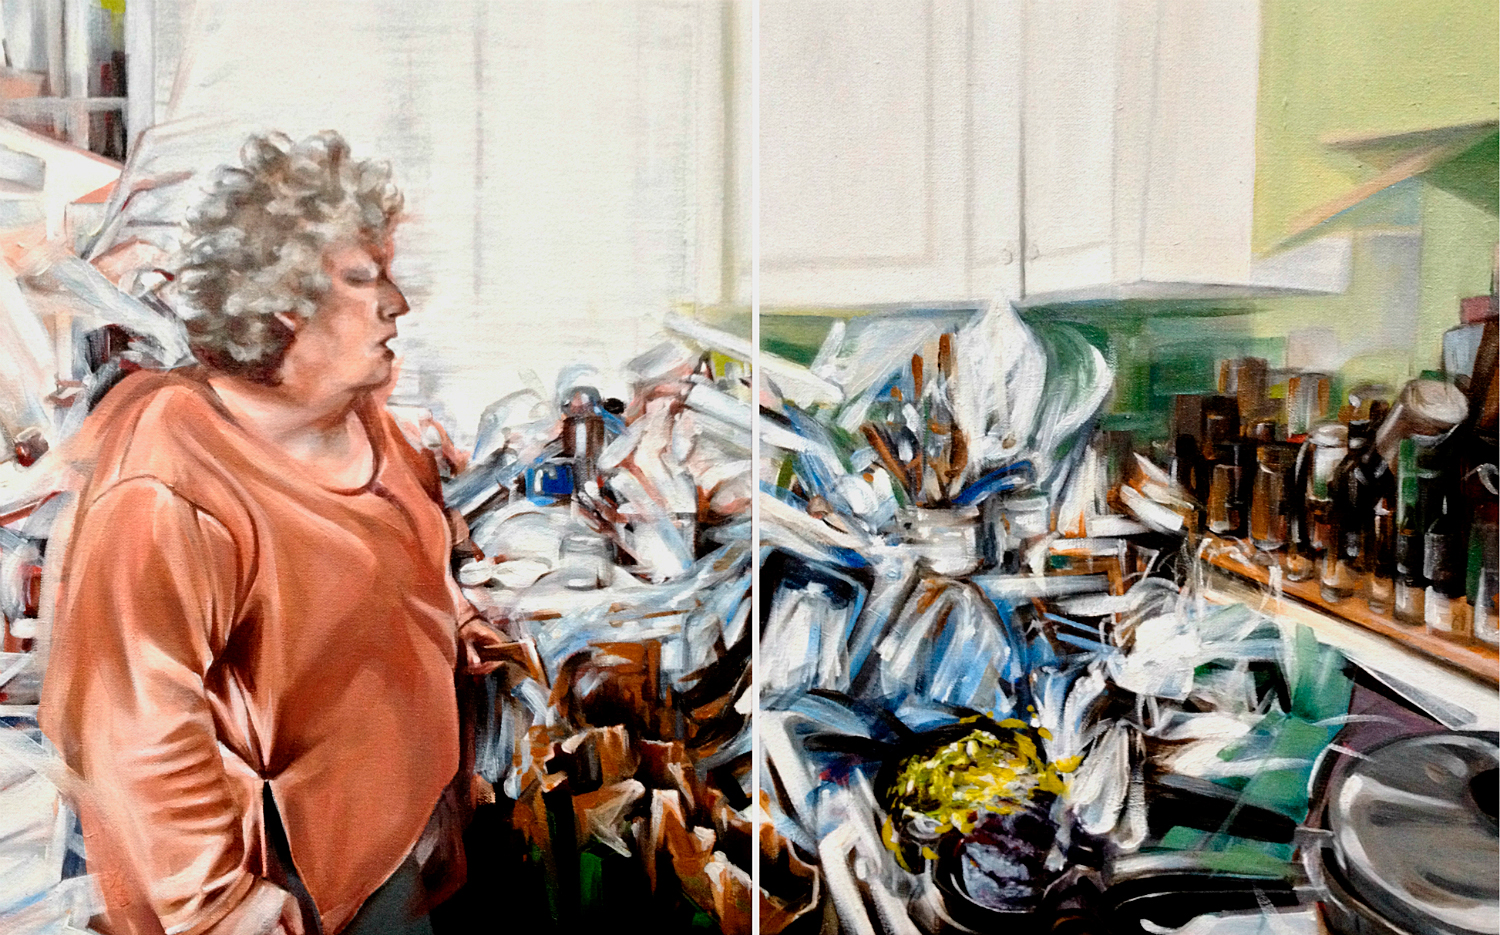 Nicole Trimble, Clutter, 2014. Oil on Canvas, 20 x 32 in. (two parts)